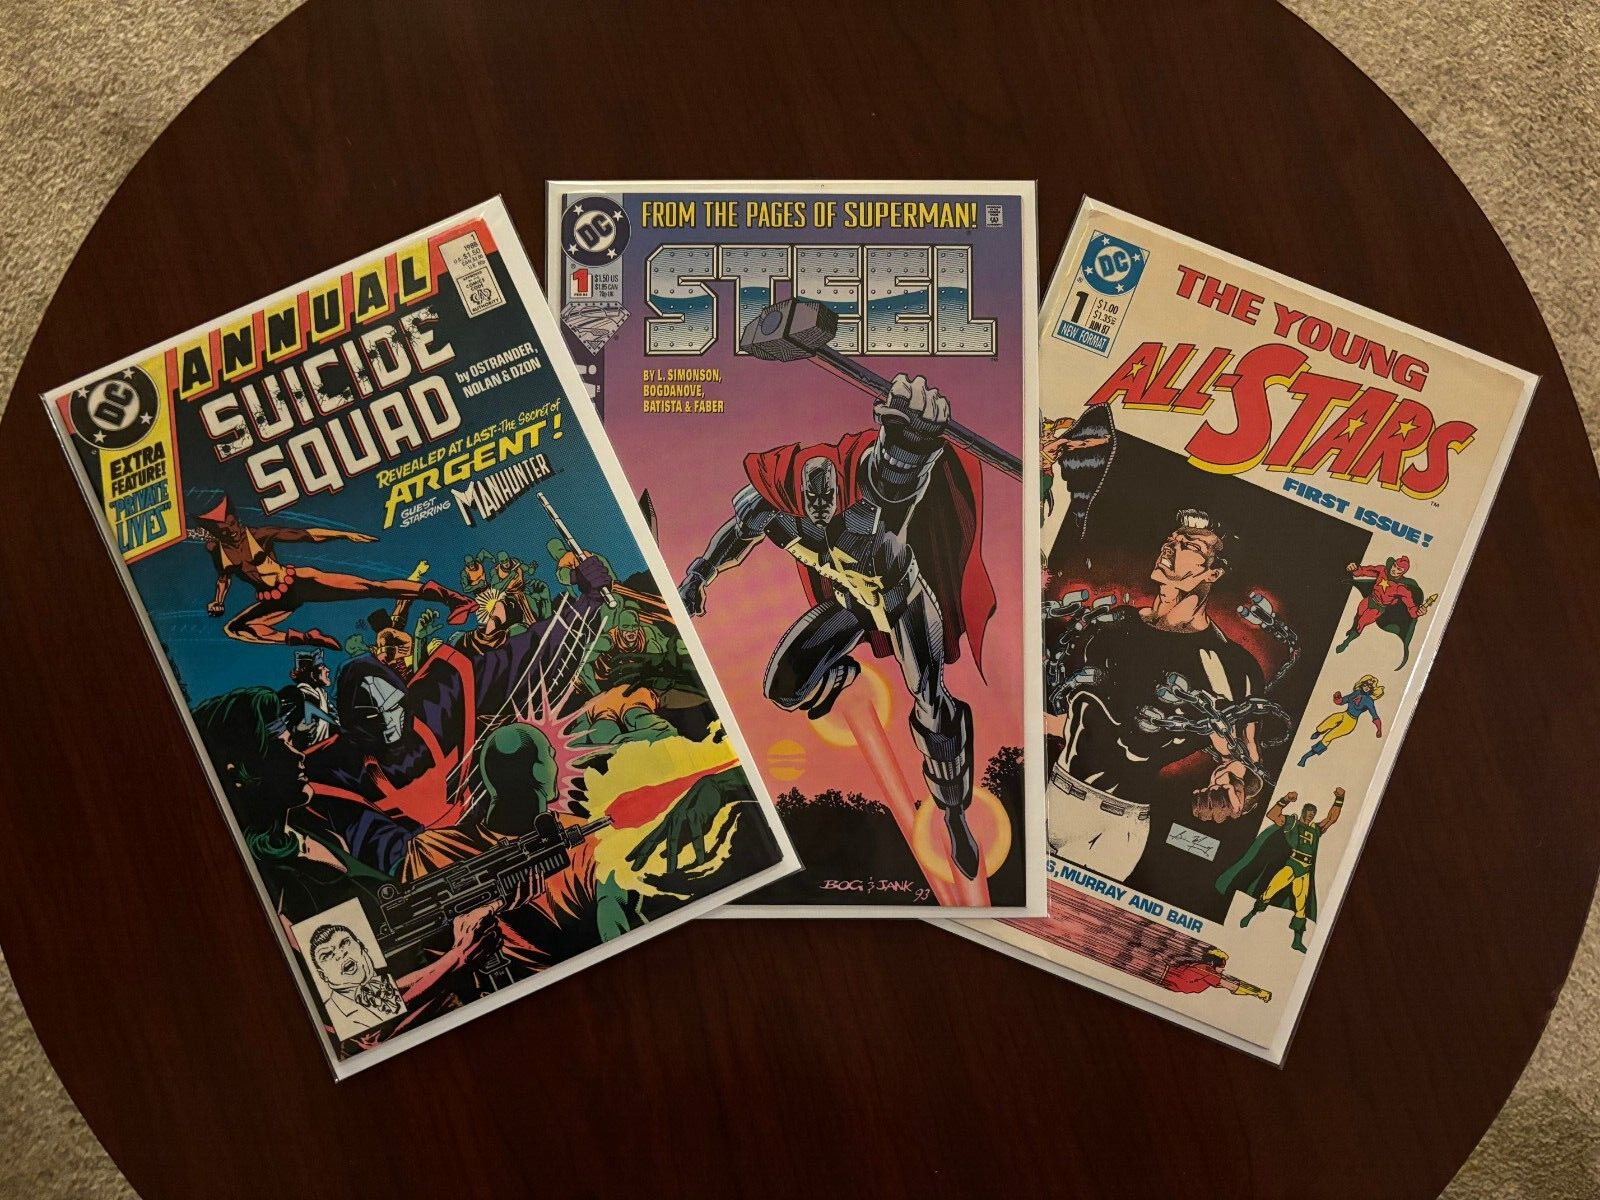 (Lot of 3 #1 DC Comics) Suicide Squad Annual #1 Steel #1 & Young All-Stars #1